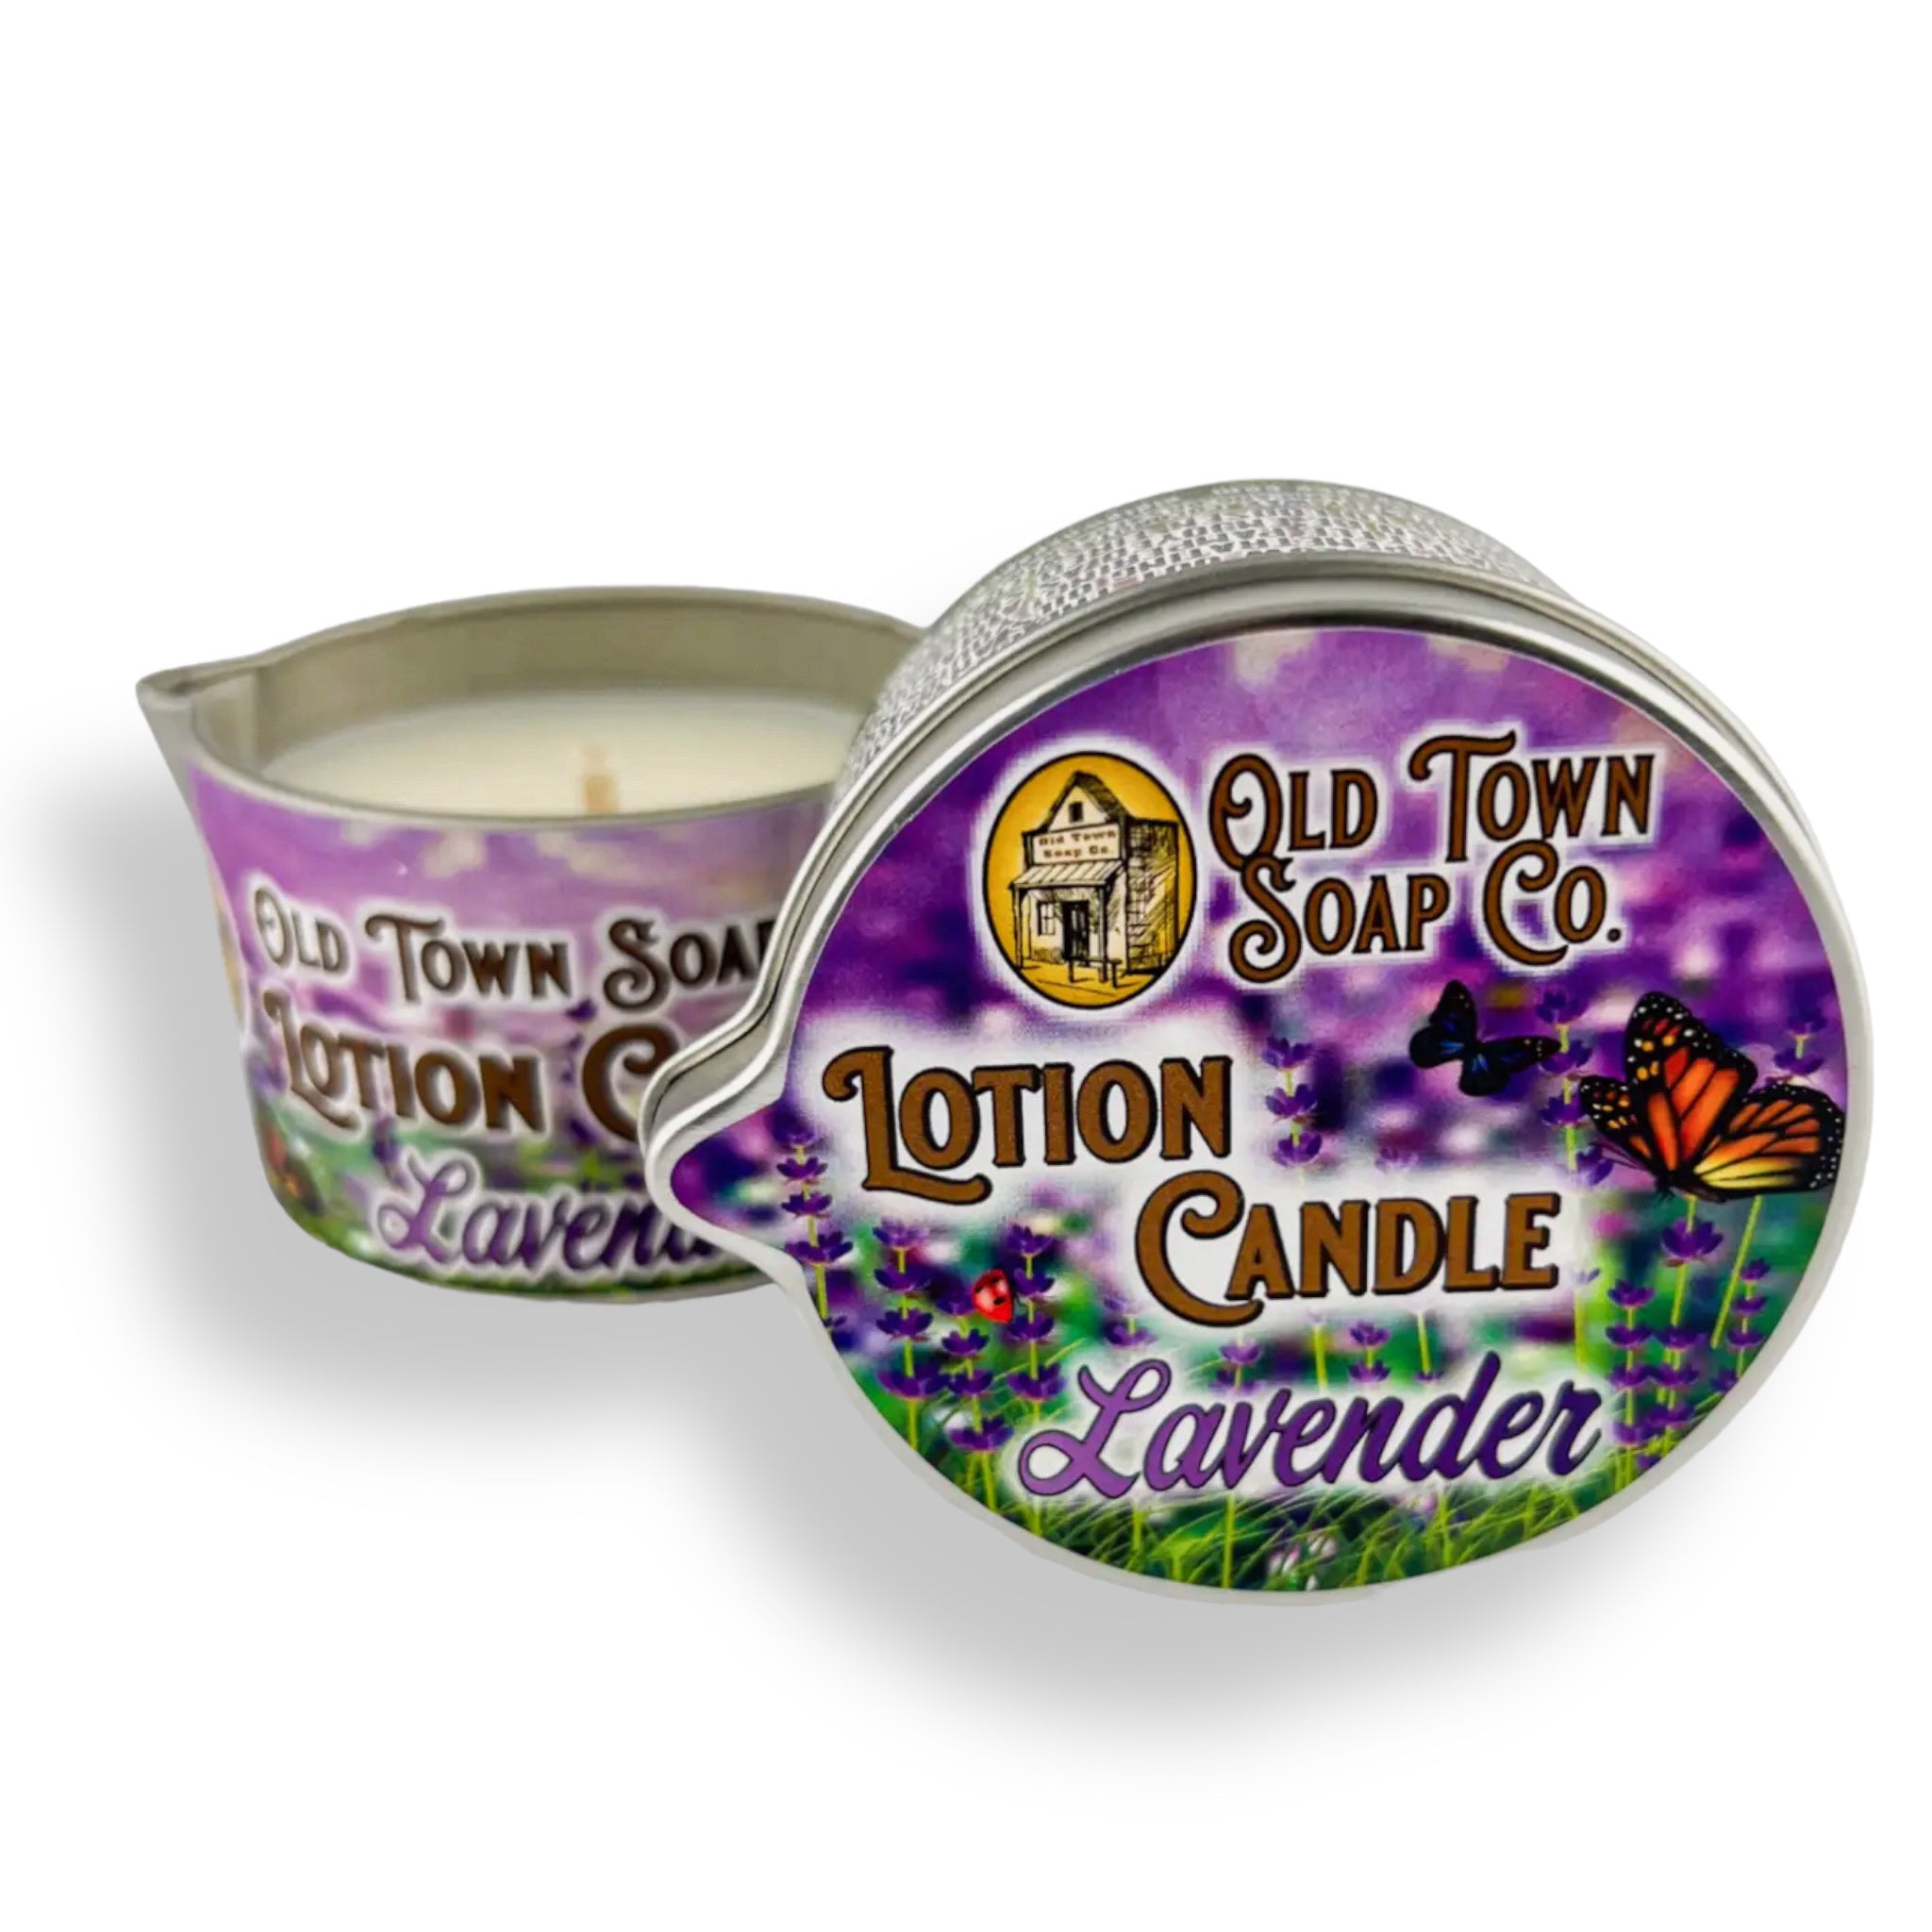 LOTION CANDLE - Lavender - Old Town Soap Co